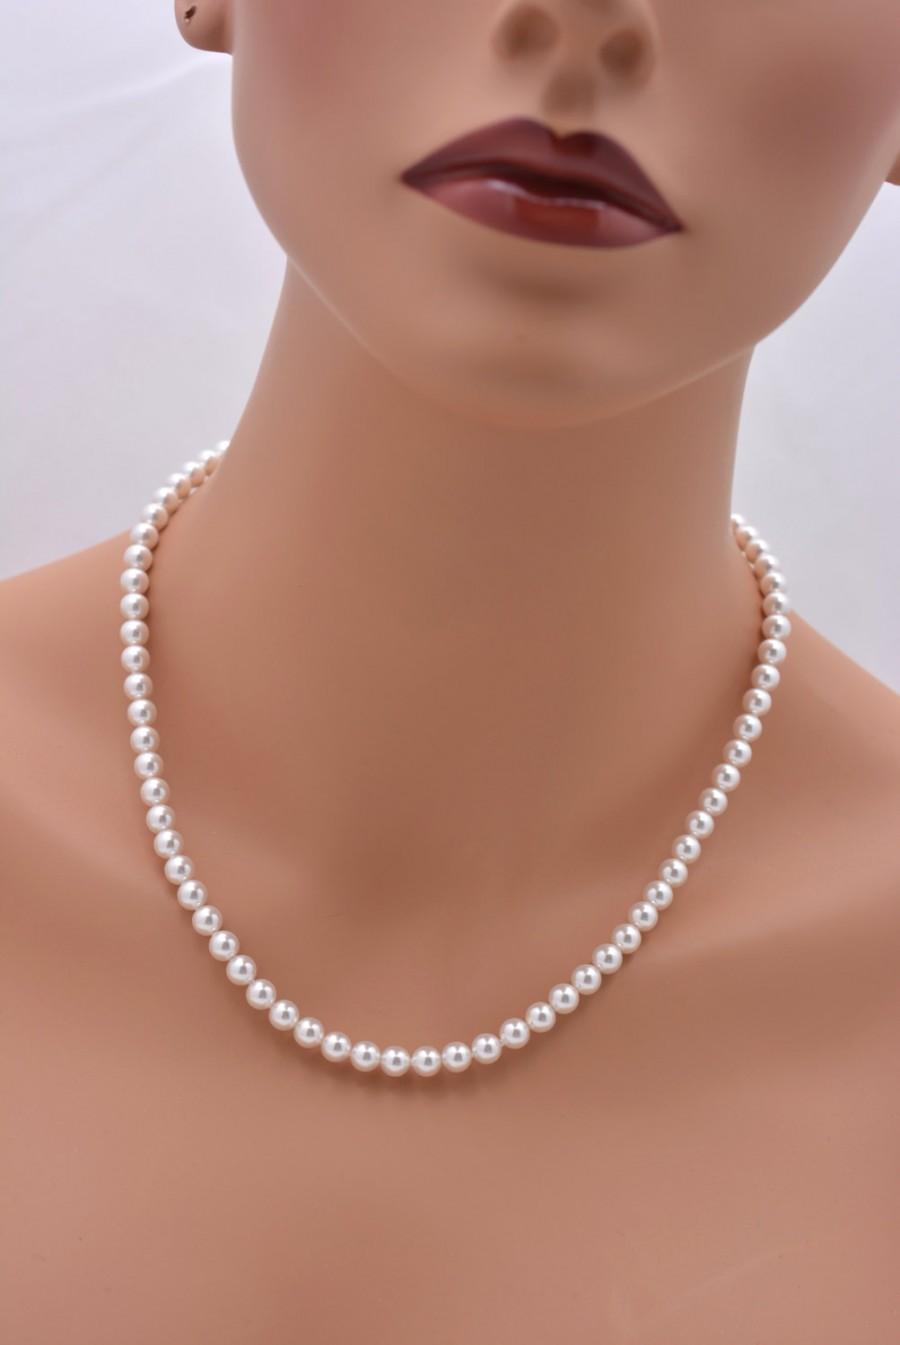 Mariage - Pearl Necklace, Pearl Bridesmaid Necklace, Classic Pearl Necklace, Pearl Strand Necklace, White or Ivory Pearl Necklace, 6mm Pearl 0259